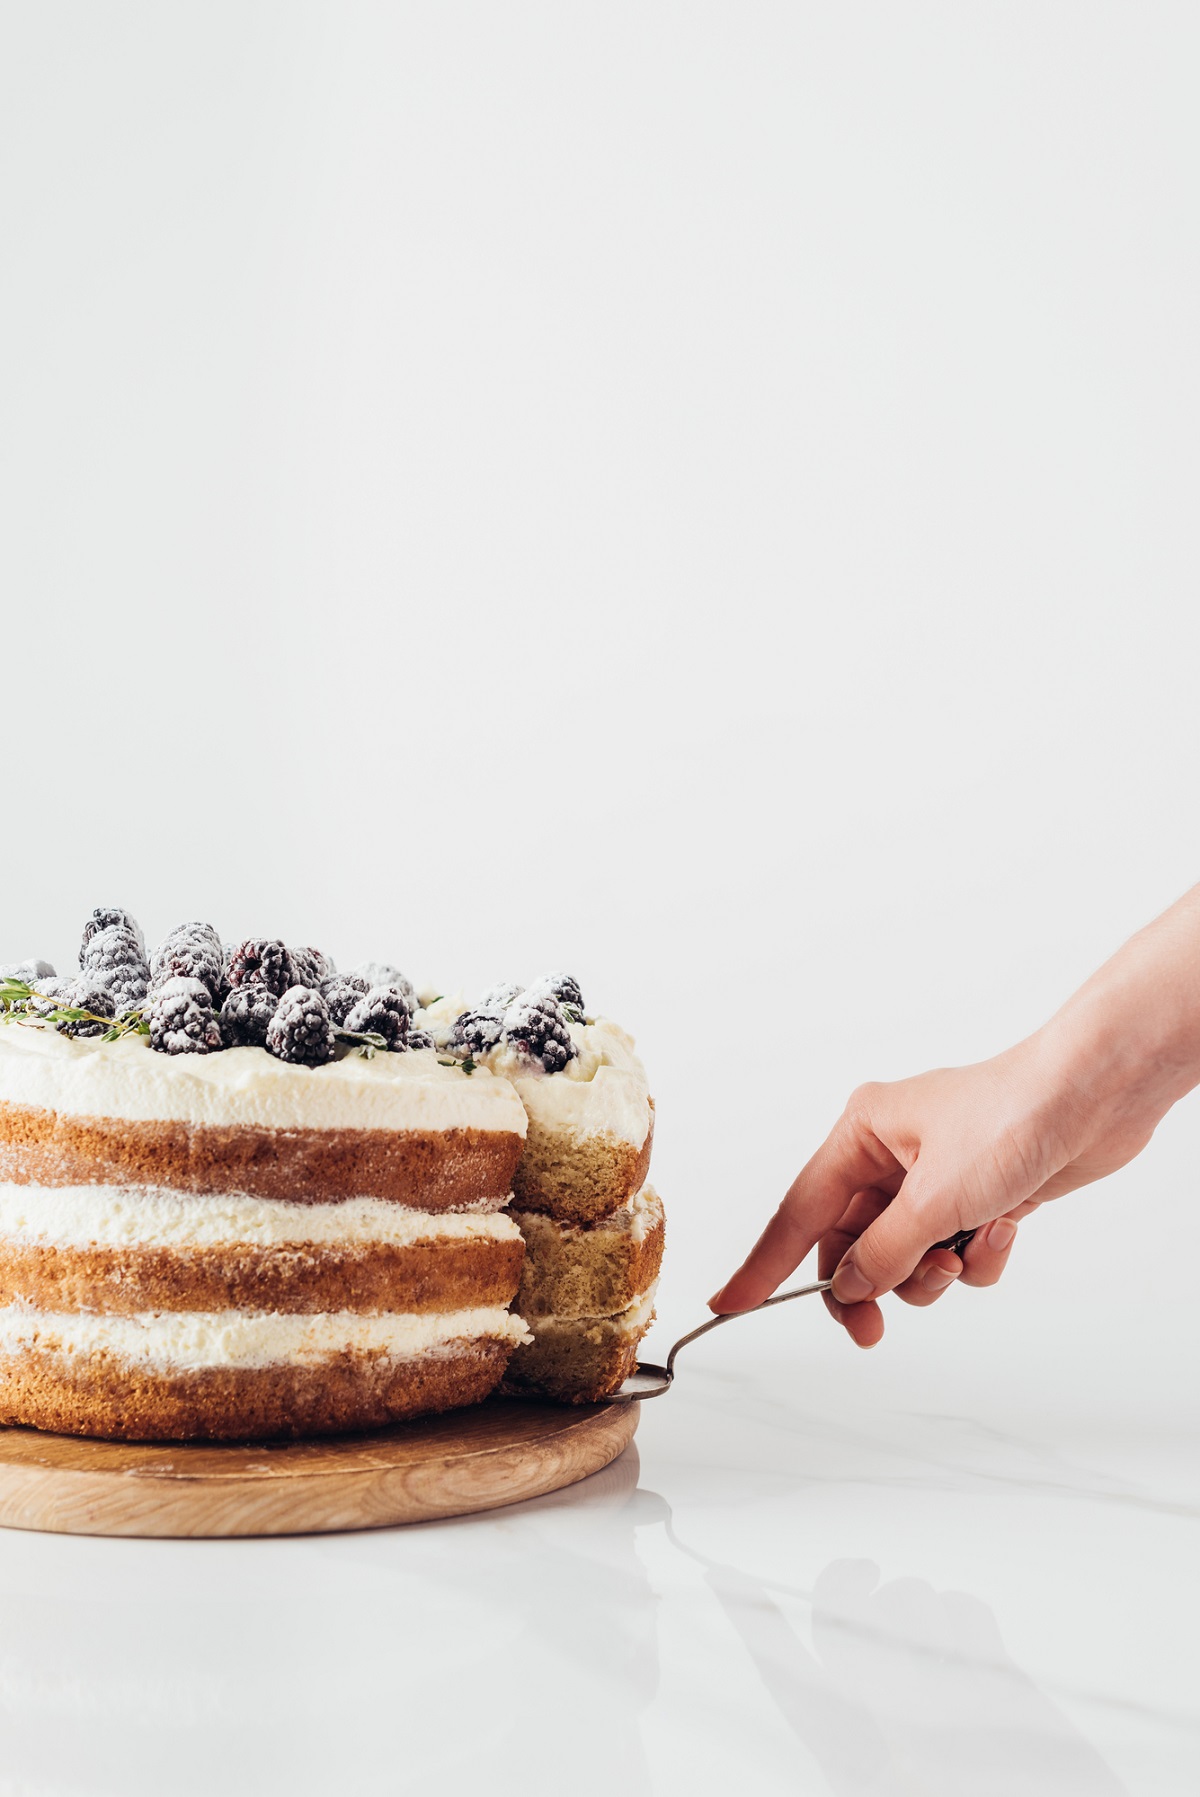 Layer cake with a cake server and hand.